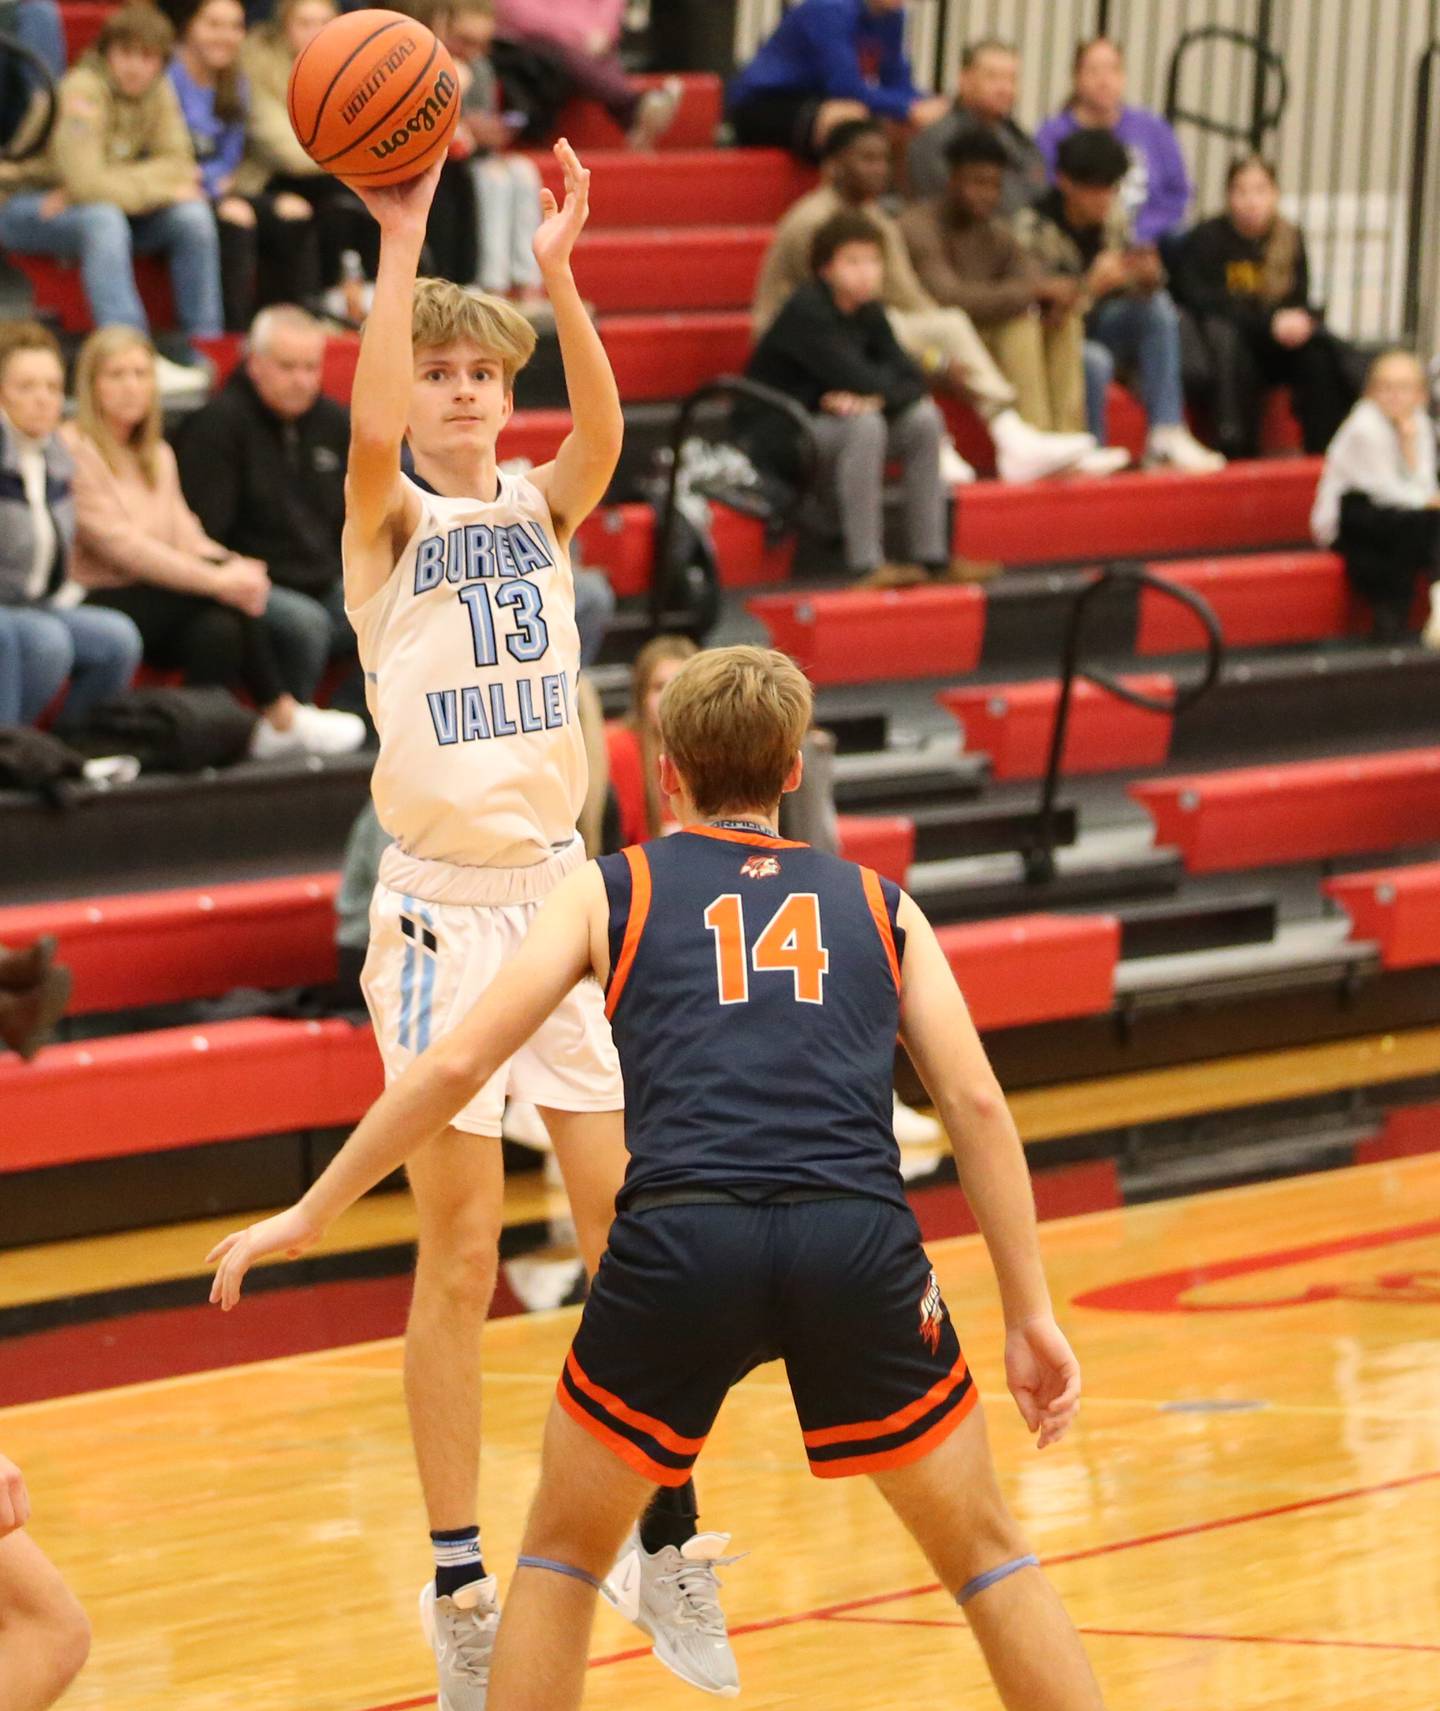 Bureau Valley's Parker Stier (13) shoots a jump shot over Pontiac's Henry Brummel (14) during the Colmone Classic tournament on Monday, Dec. 5, 2022 at Hall High School in Spring Valley.